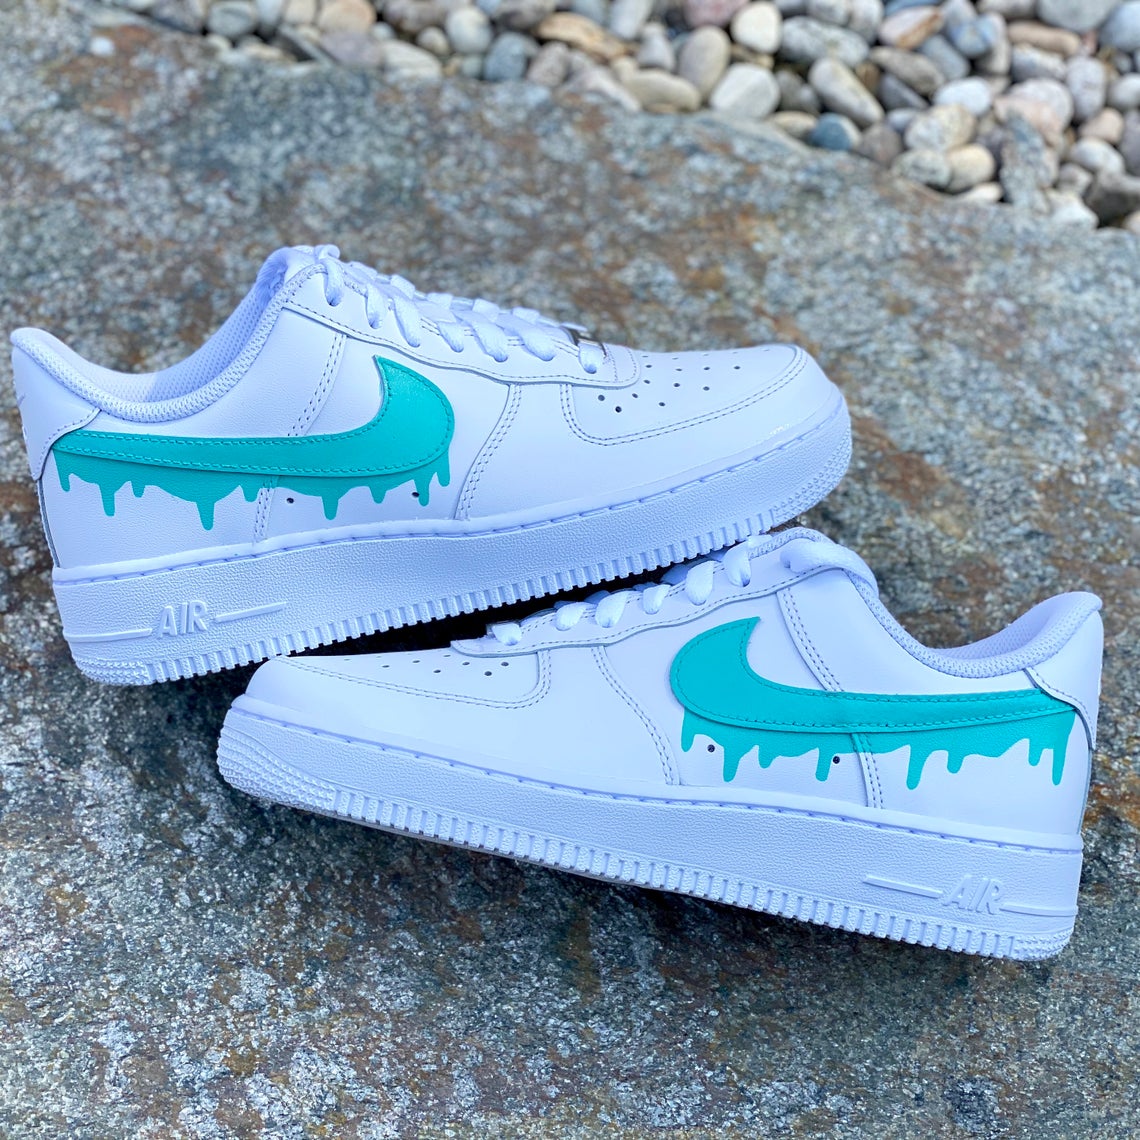 Air Force 1 Custom Yellow Drip White Shoes Men Women Kids Sizes Af1 Sneakers 8.5 Mens (10 Women's)